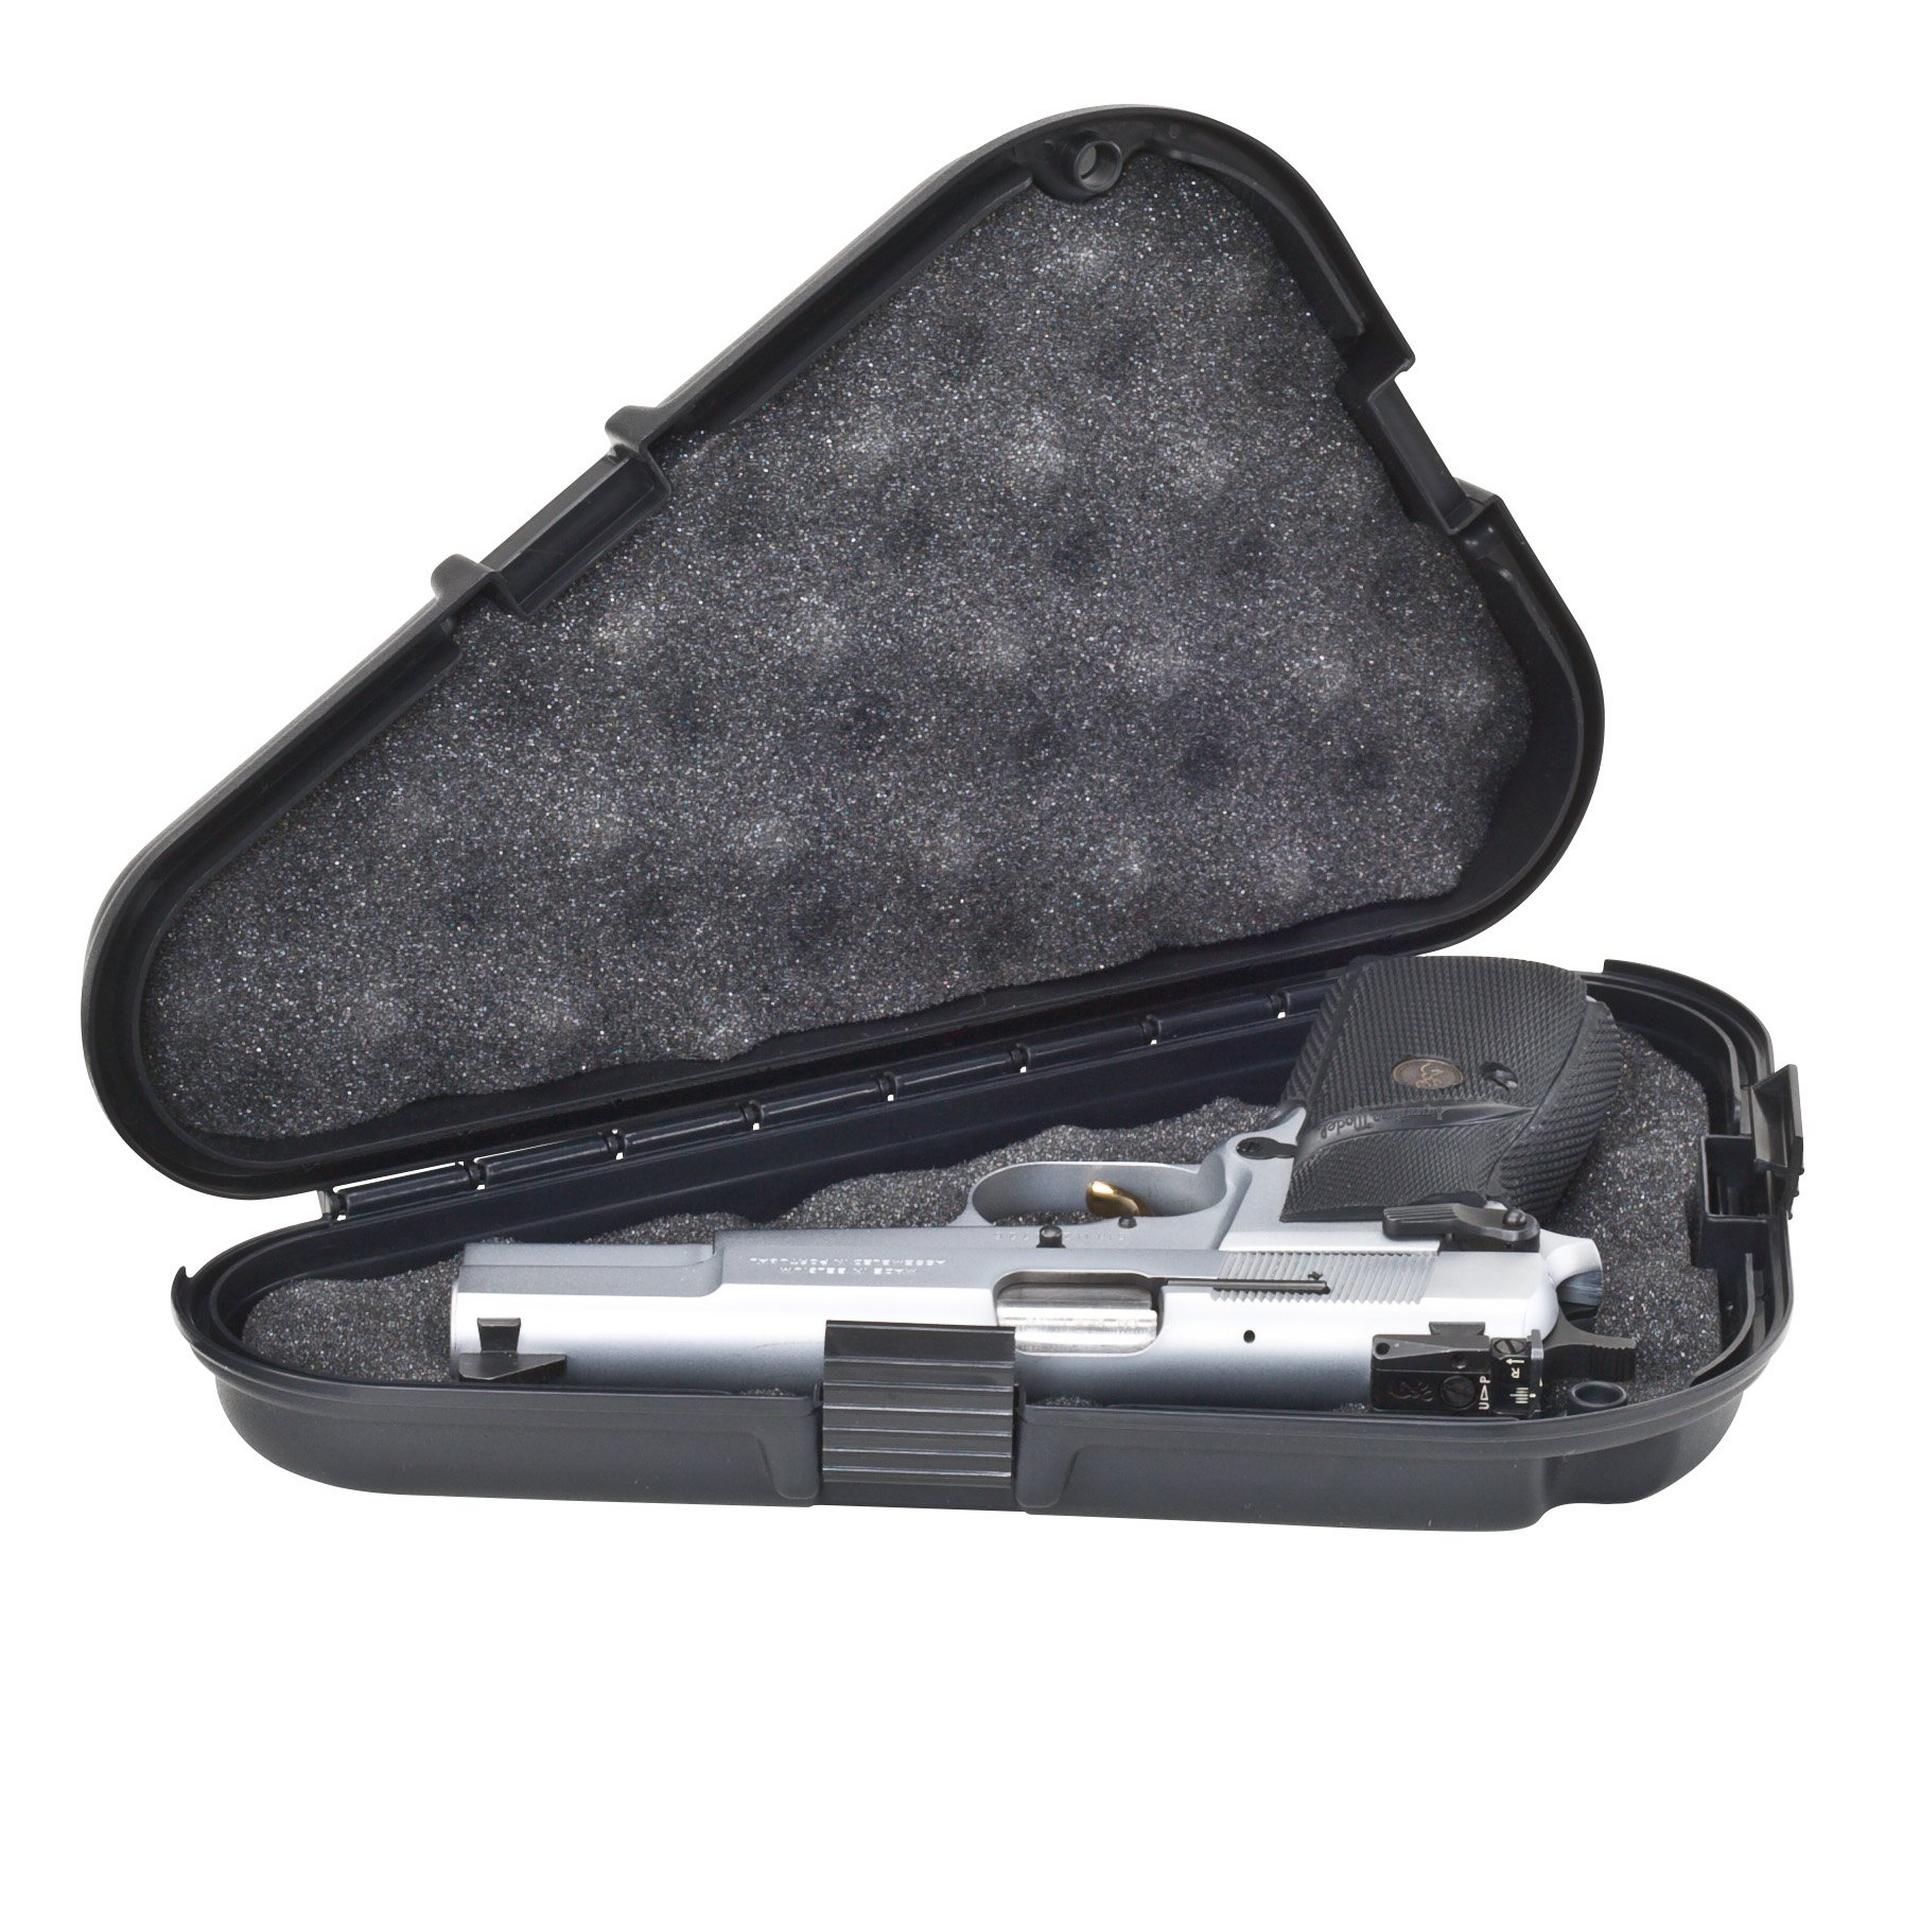 Protector Series® Large Pistol Case | Plano®